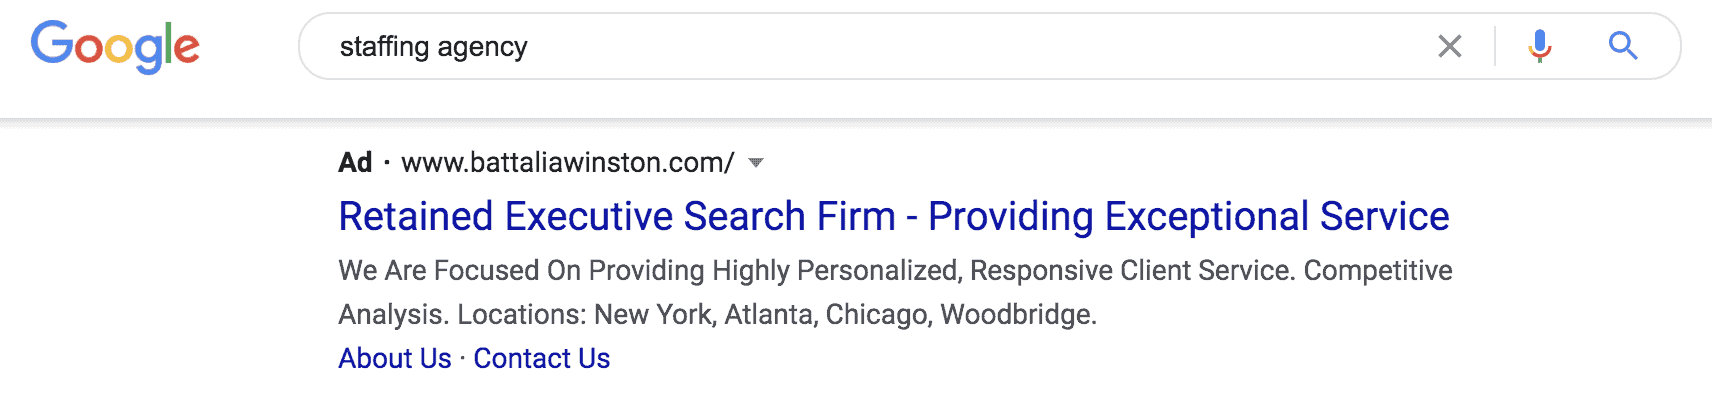 staffing agency advertising google ad